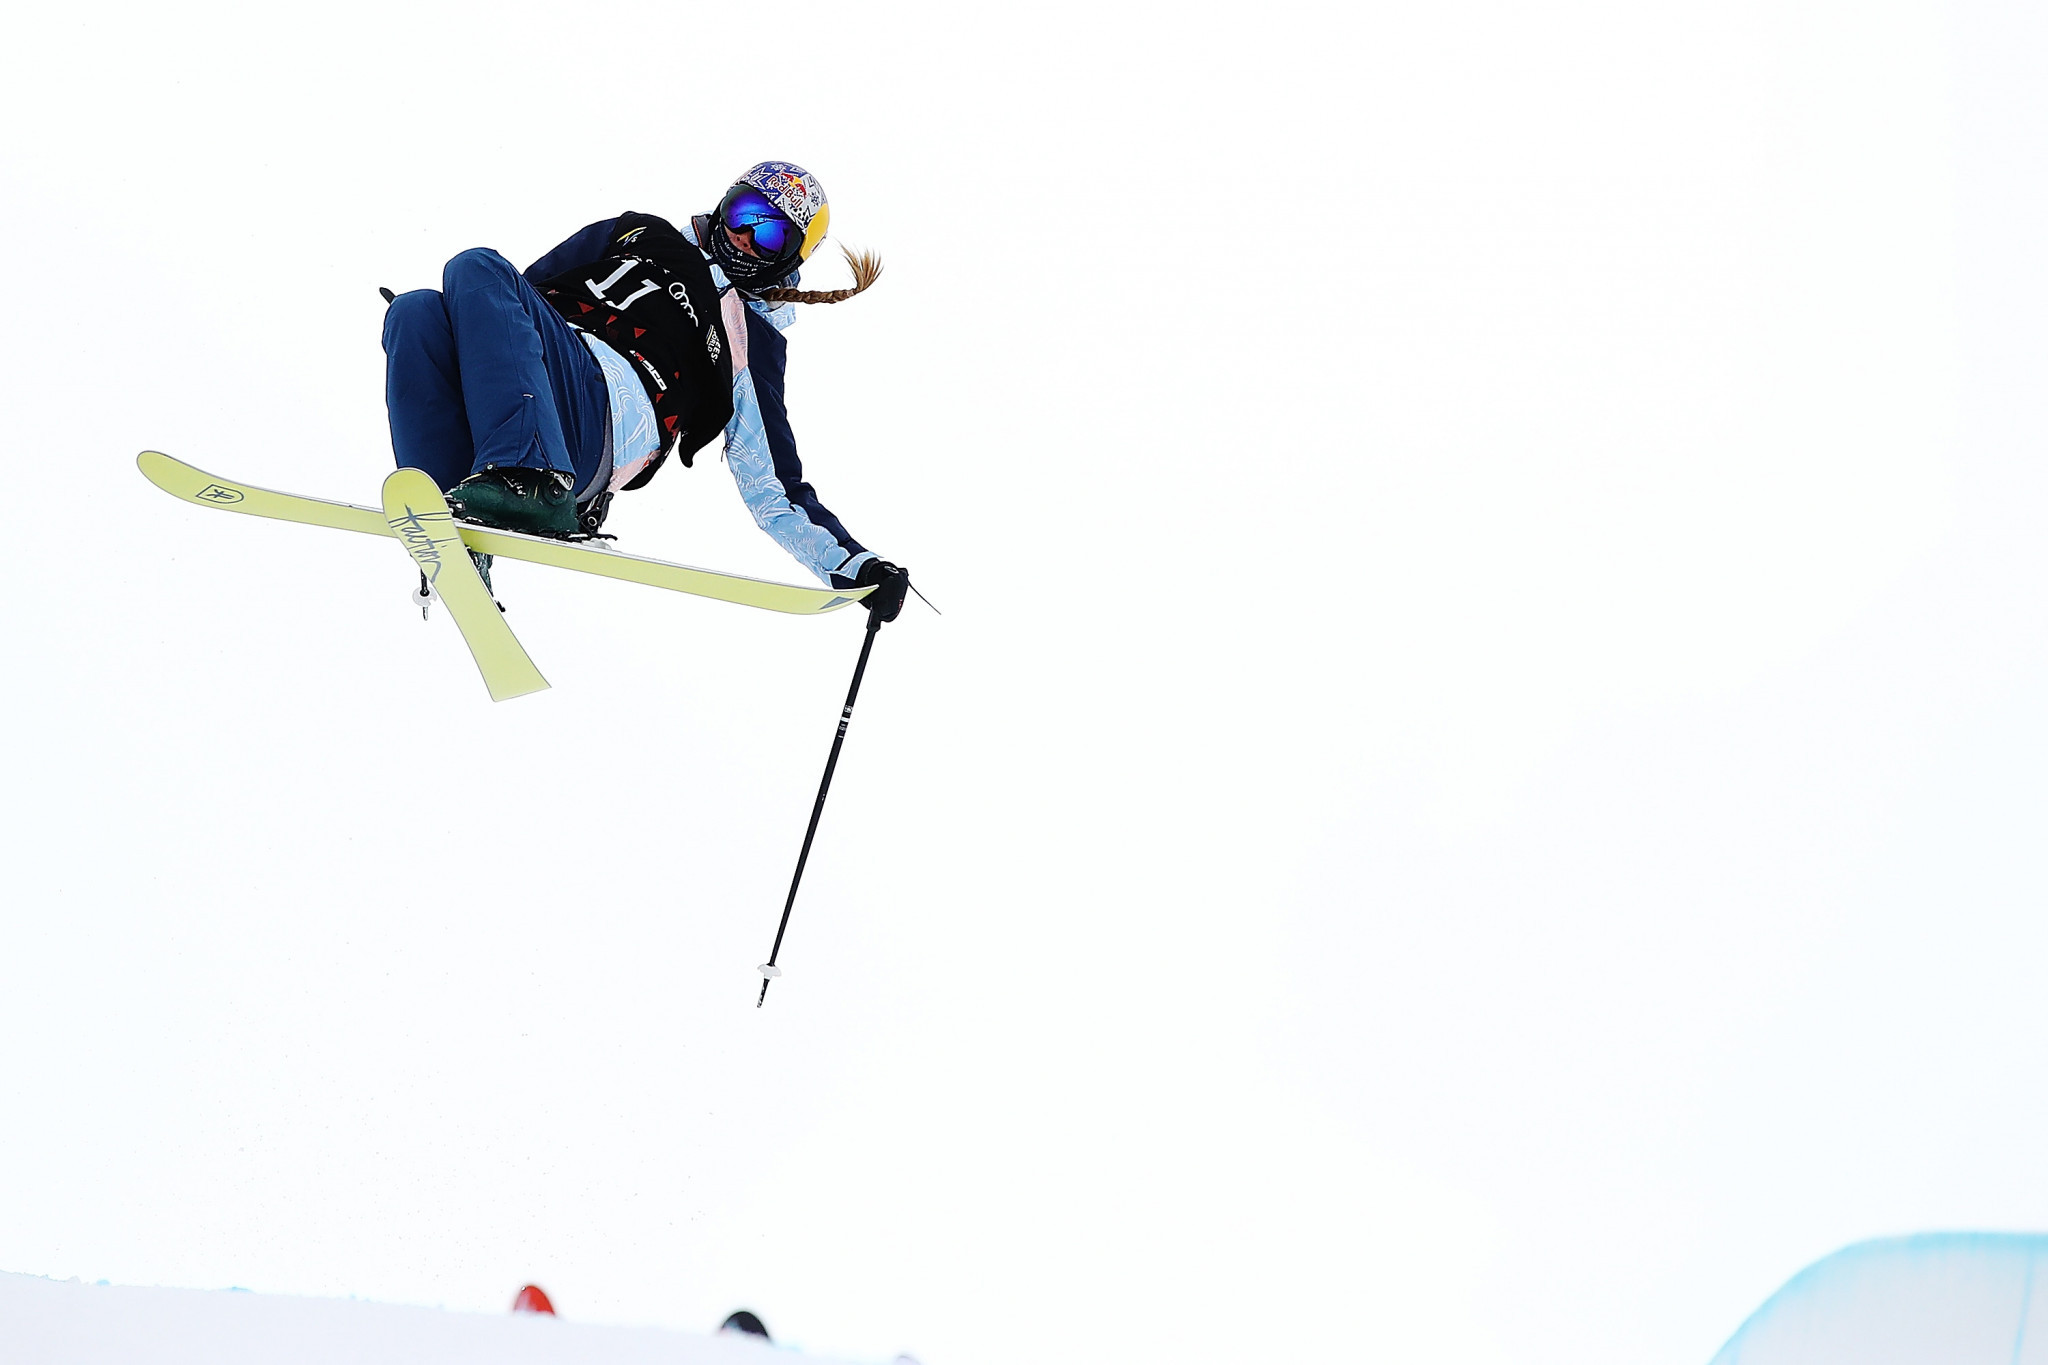 Sildaru tops women's slopestyle qualification round at Freestyle Skiing World Cup